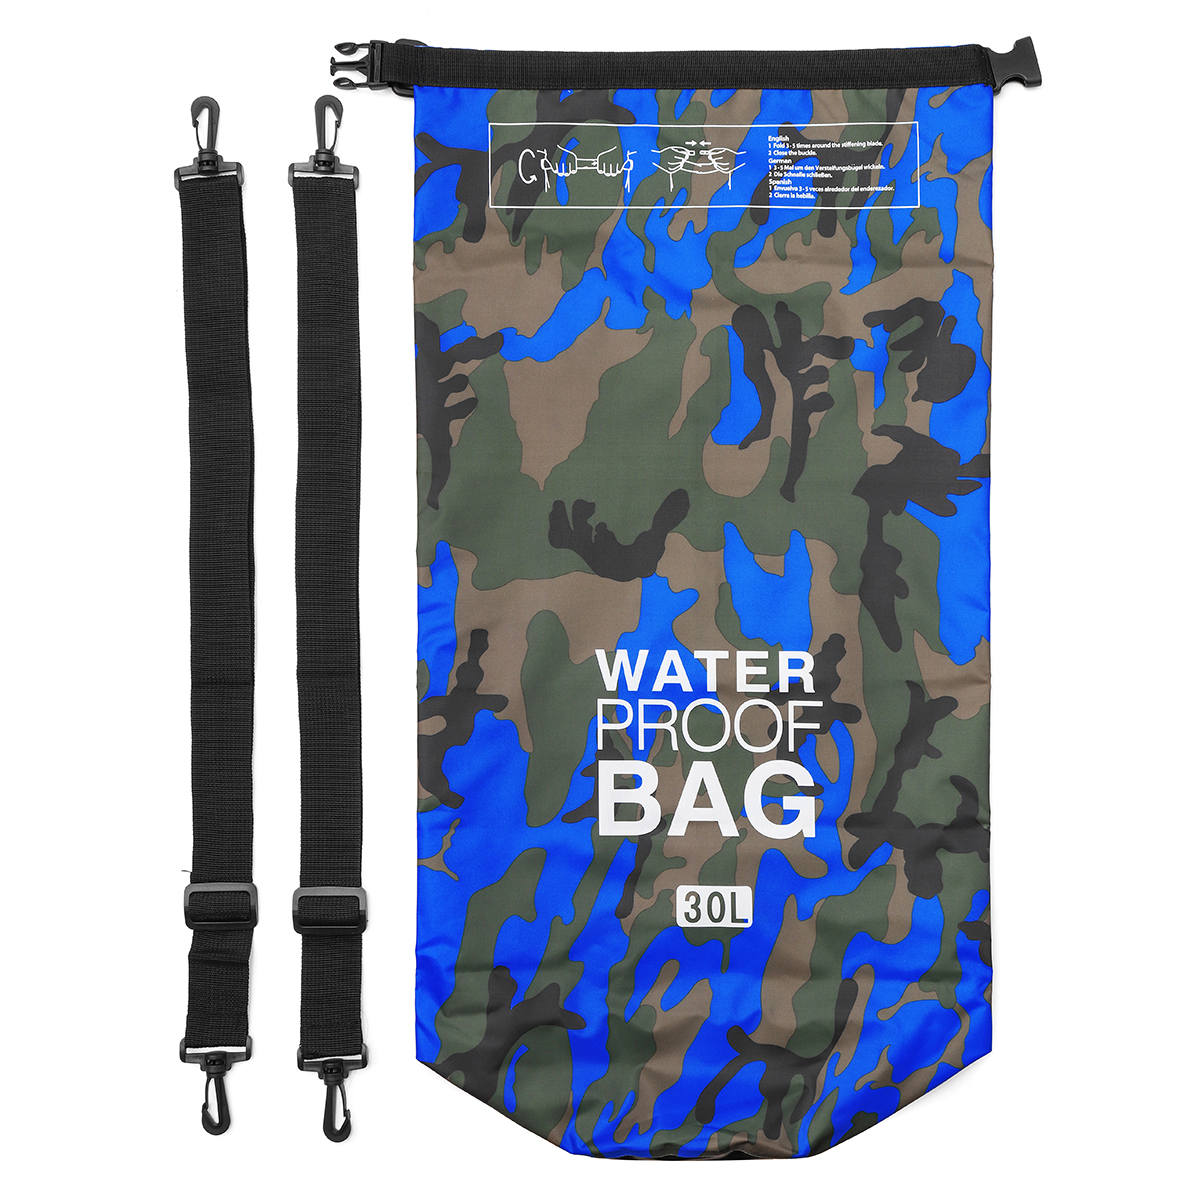 30L-Outdoor-Sports-Waterproof-Dry-Bag-Backpack-Pouch-For-Floating-Boating-Kayaking-Camping-1338574-7